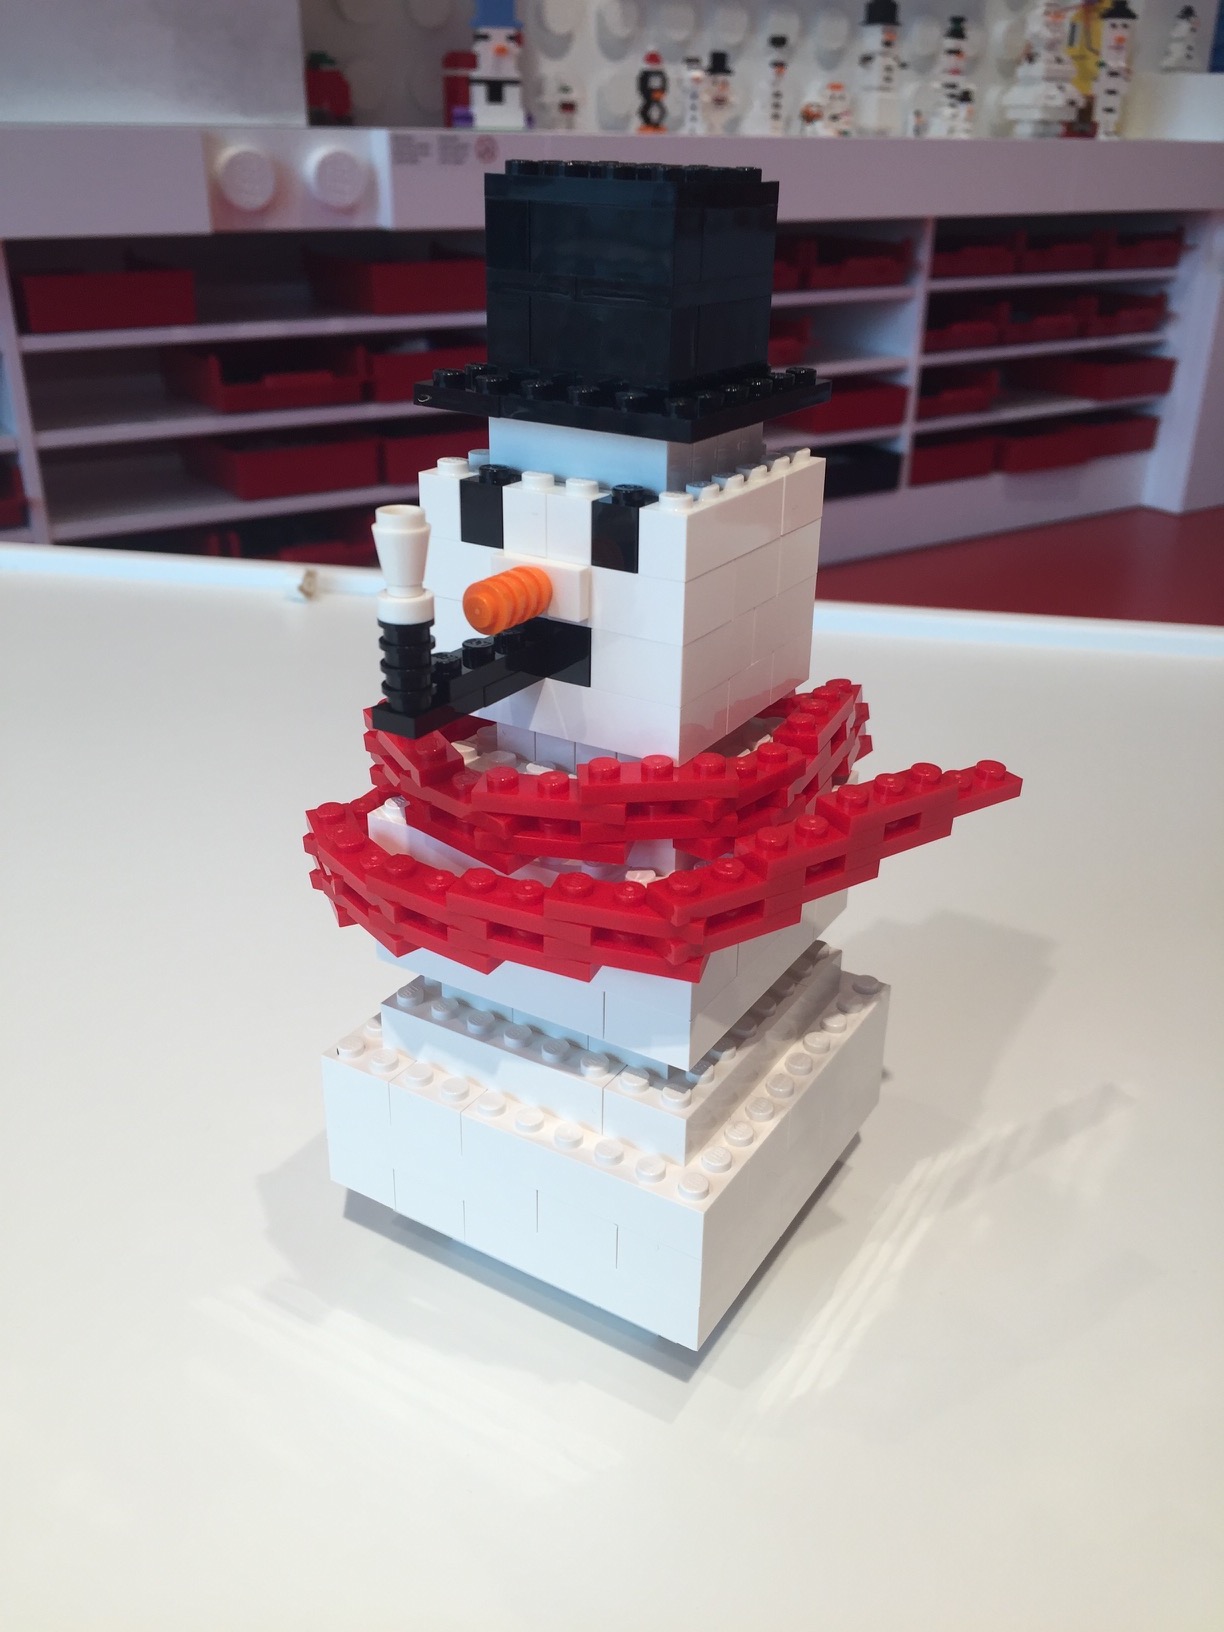 A blocky white LEGO snowman with a black tophat, orange nose, and red scarf smoking a black pipe.